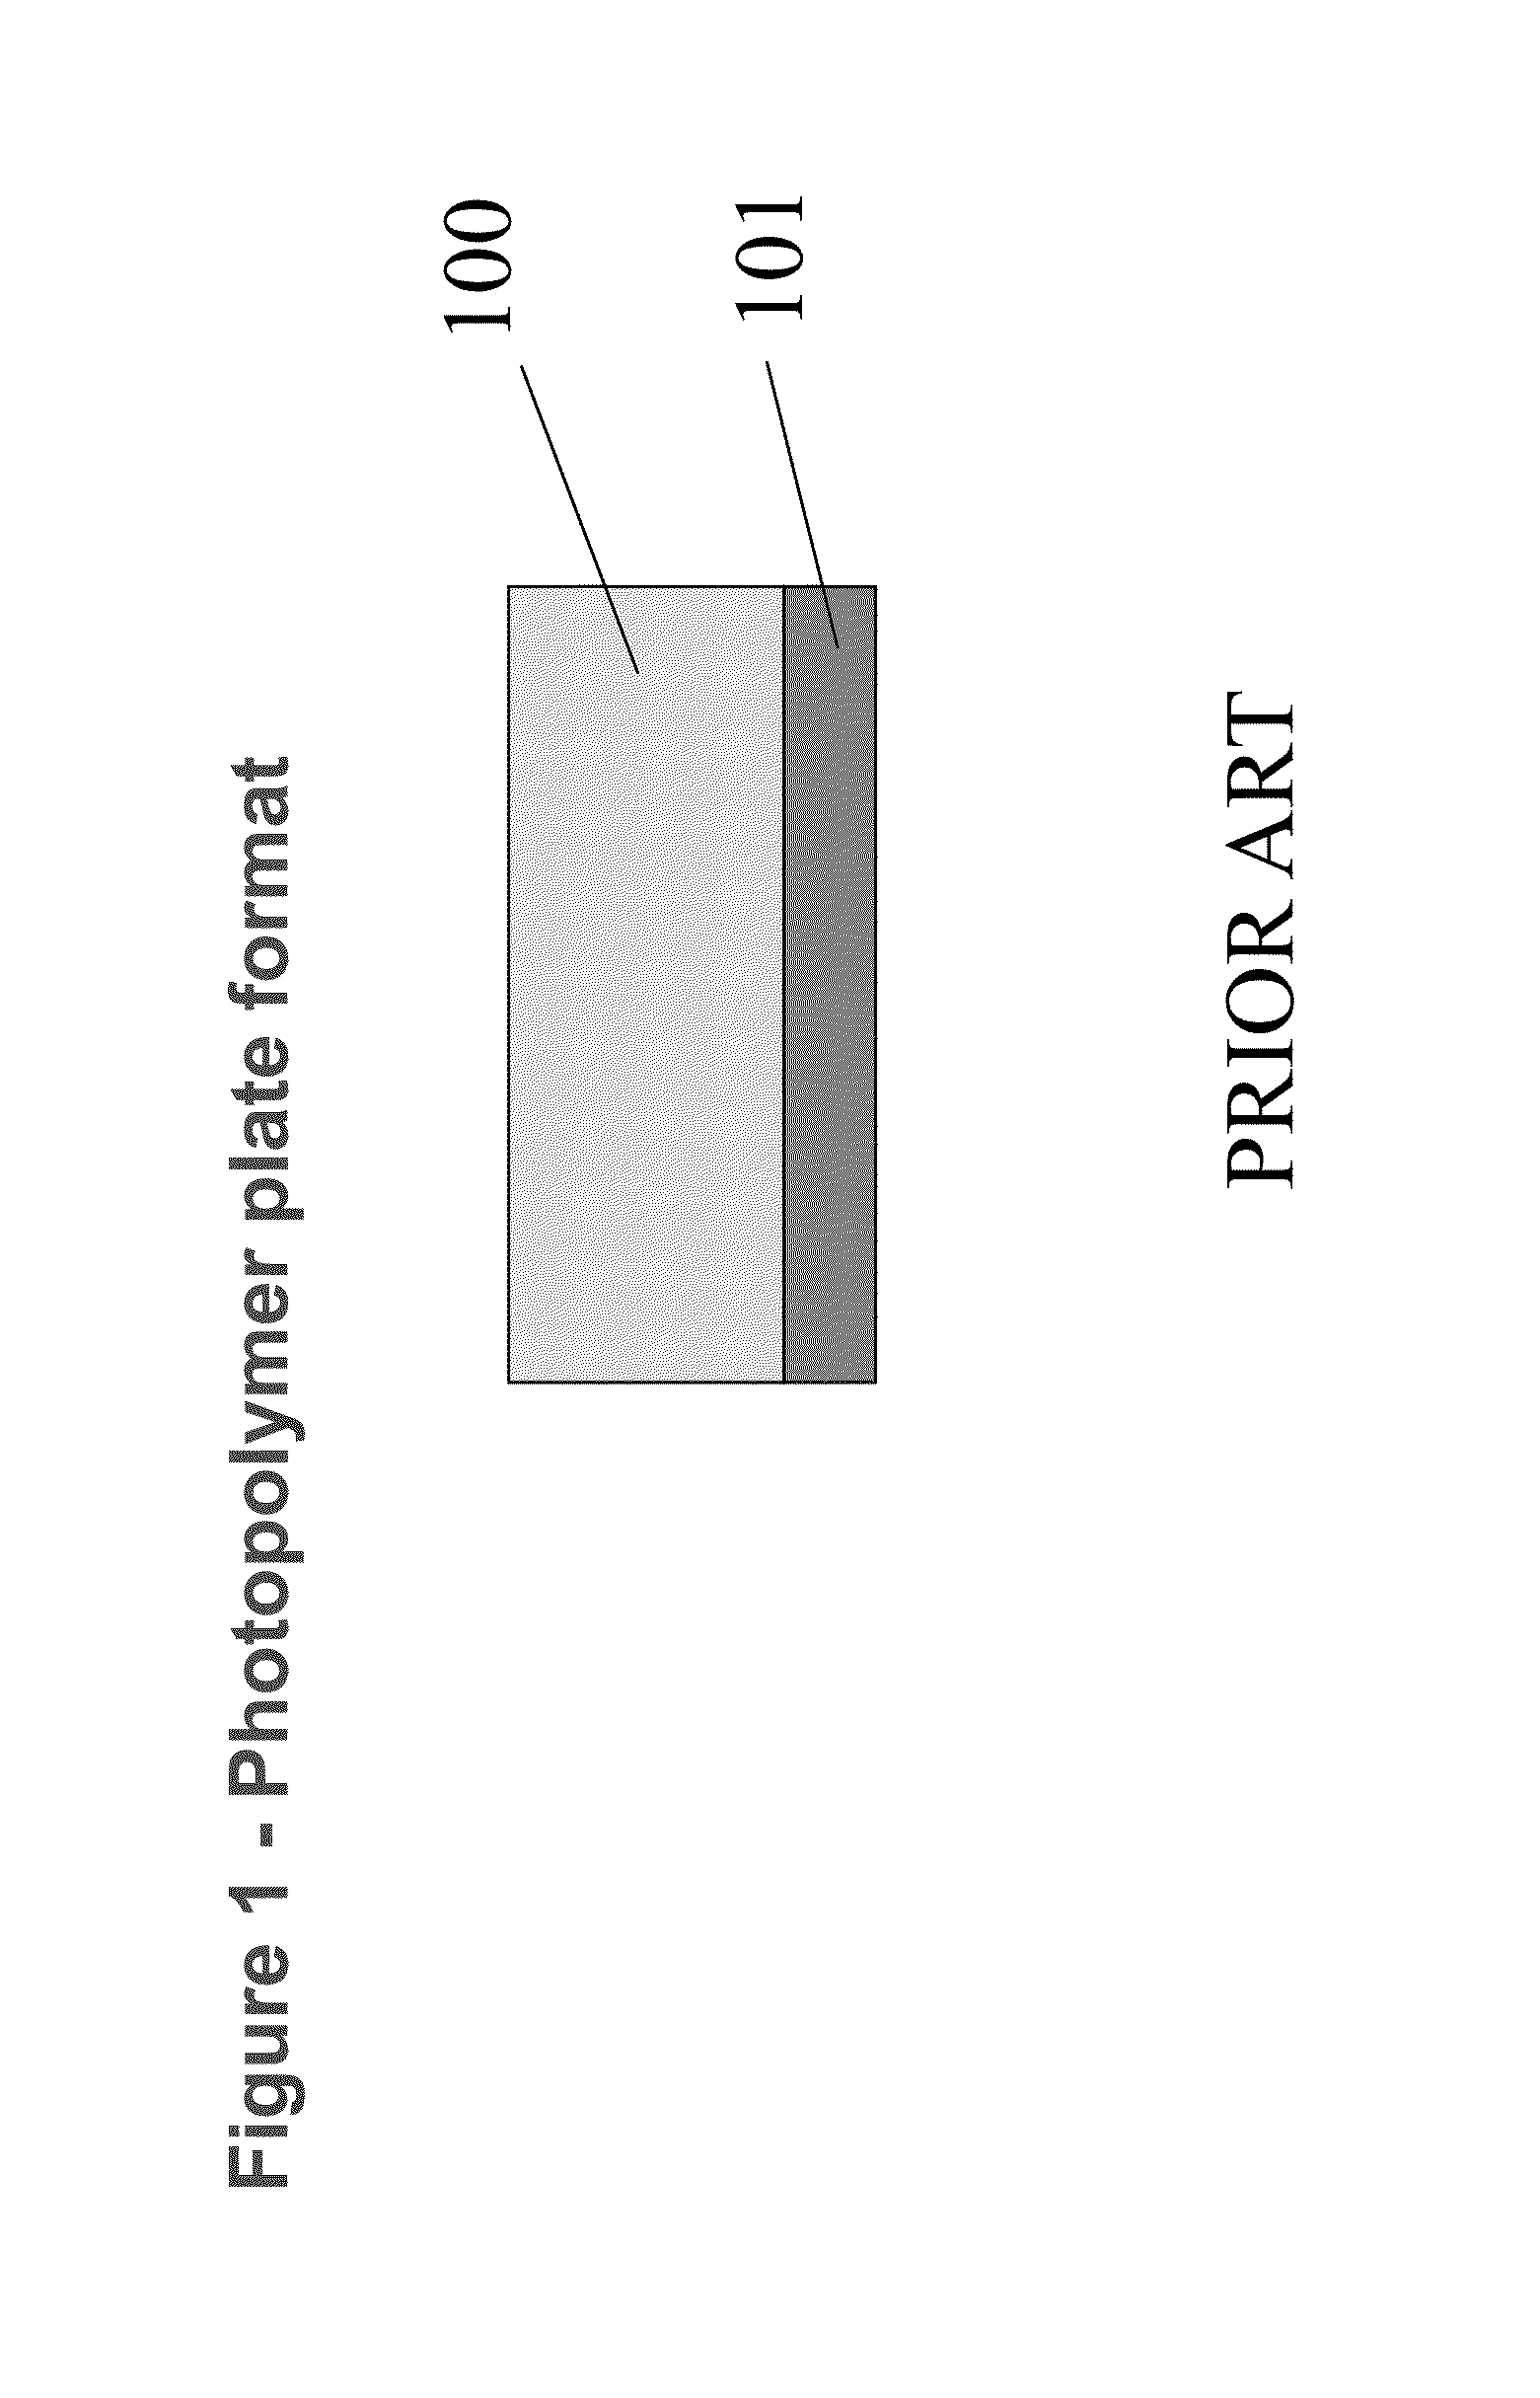 Method for forming structured microdots